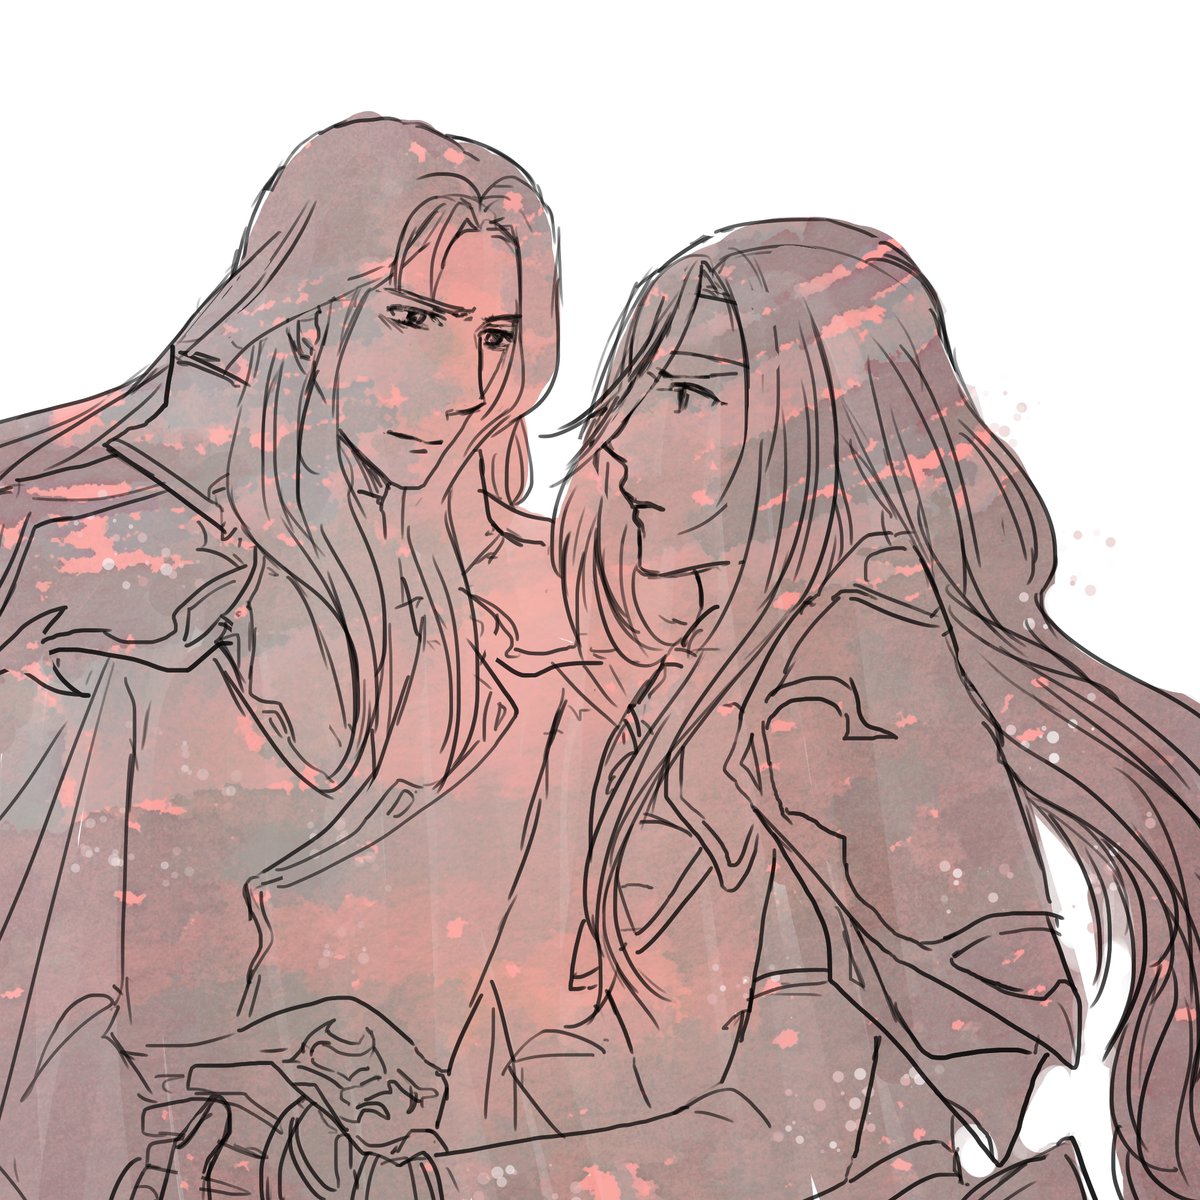 4. Arion/Altena"Altena... I didn't want to meet you like this. I'm still living in disgrace..."